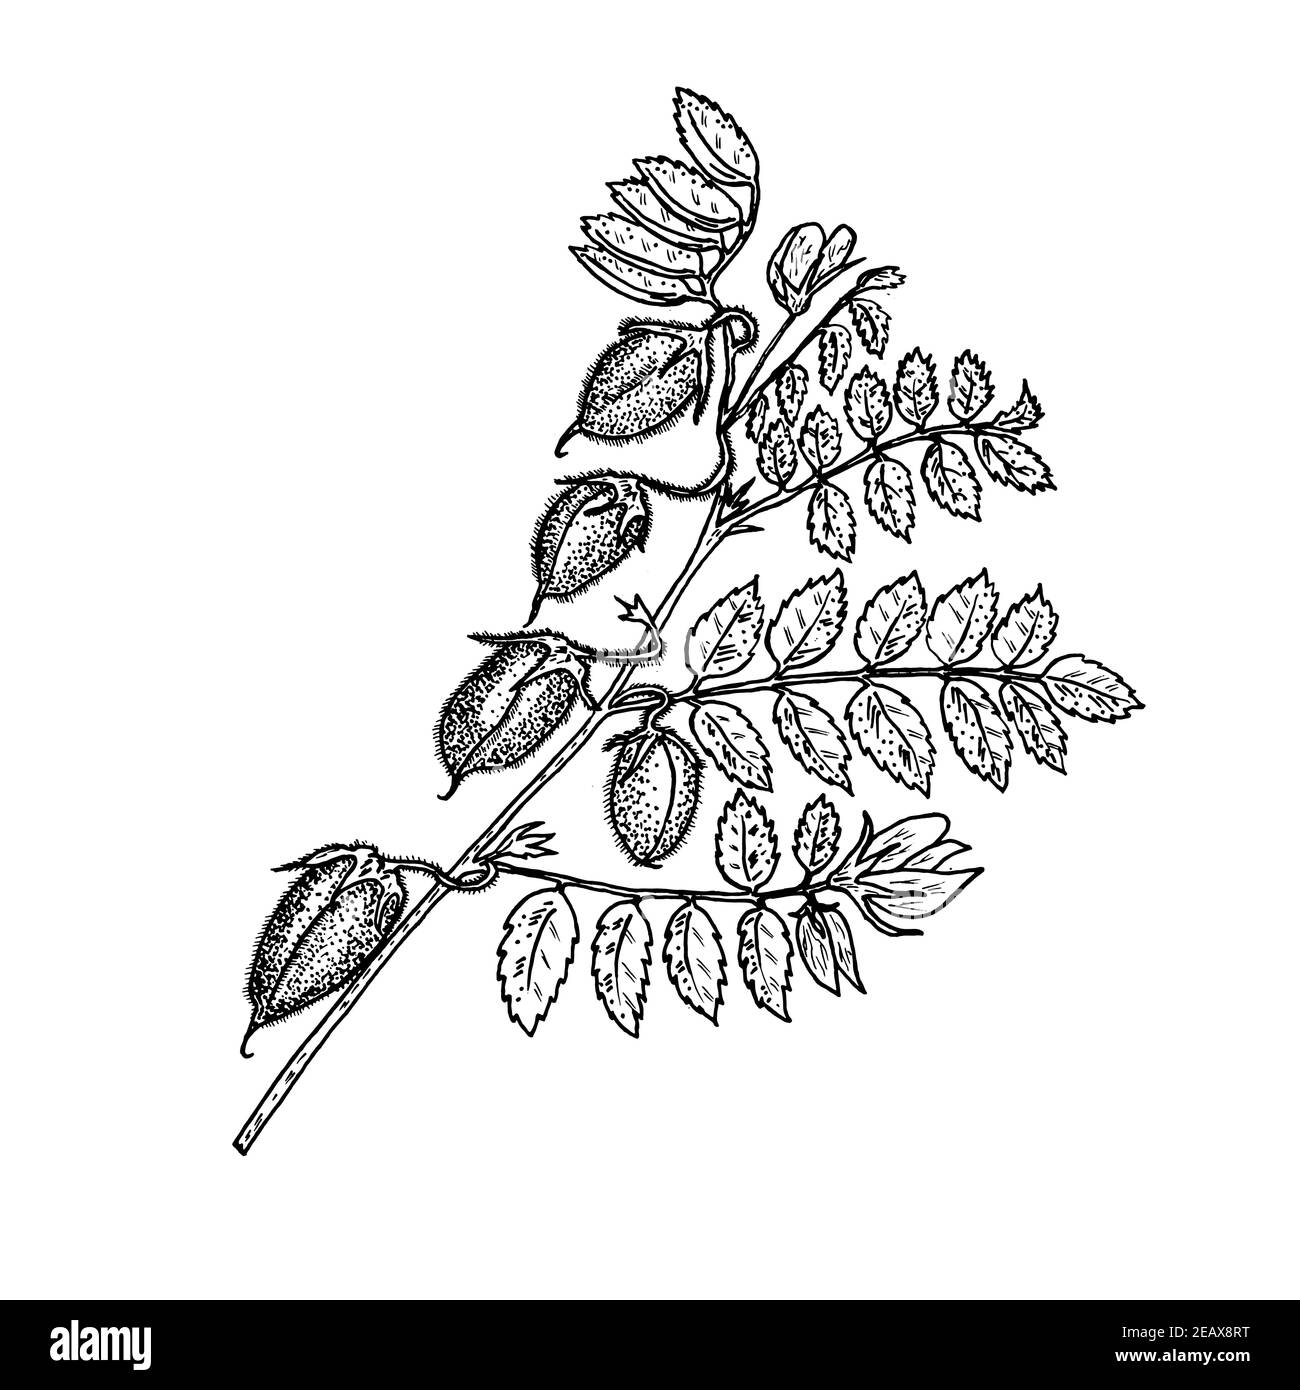 Plant with chickpea fruits. Growing peas. Ripening beans in vintage style. Monochrome style. Stock Vector